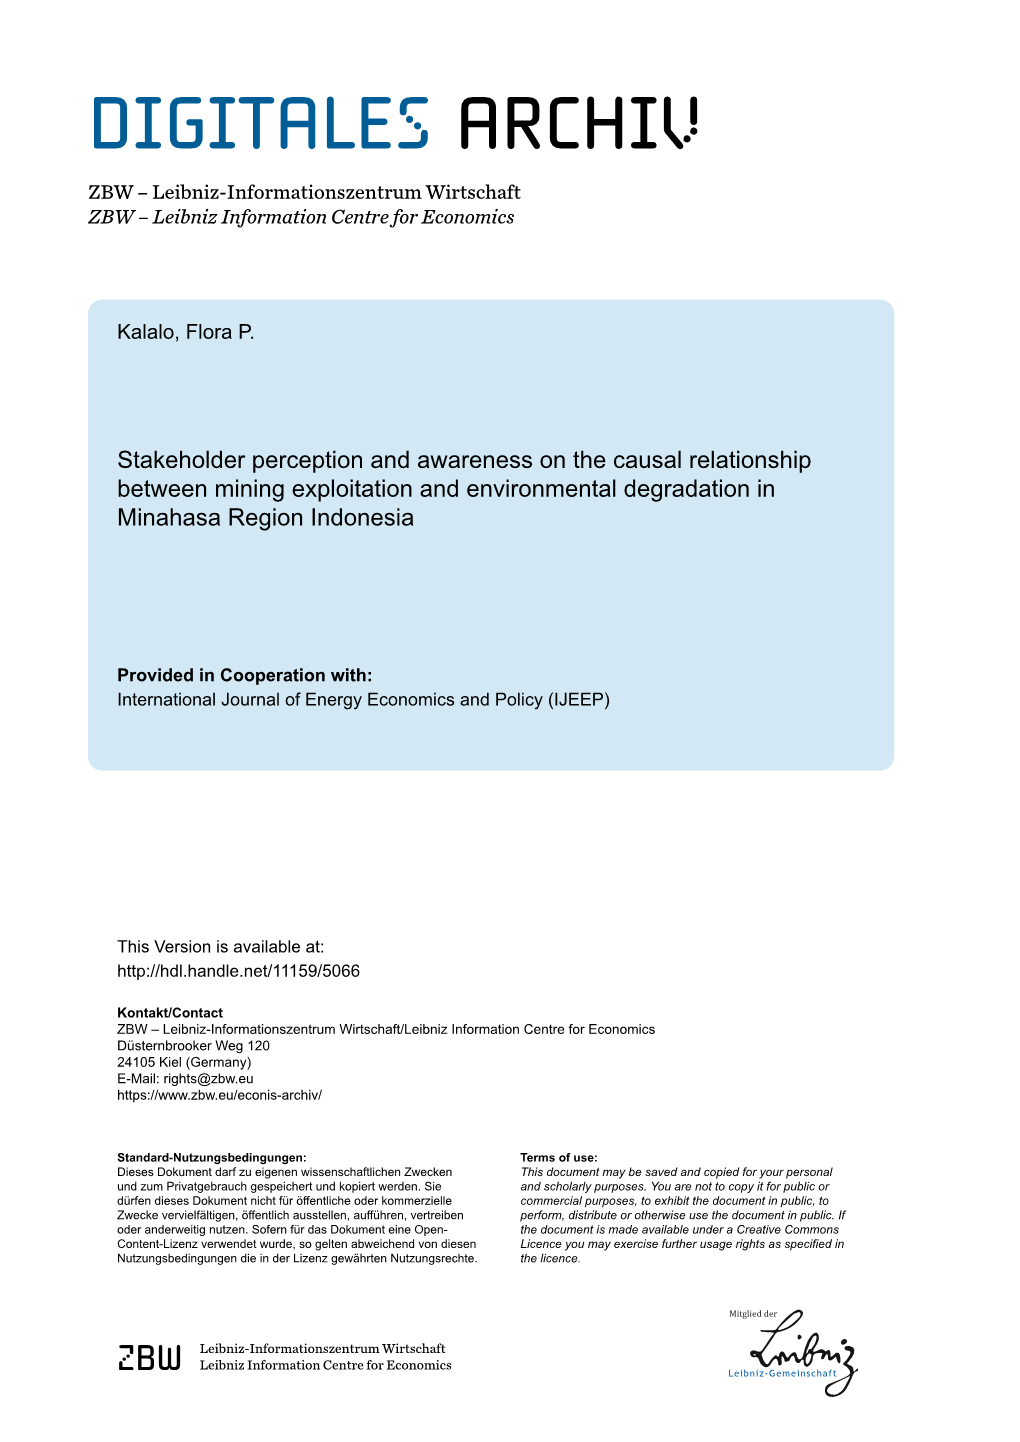 Stakeholder Perception and Awareness on the Causal Relationship Between Mining Exploitation and Environmental Degradation in Minahasa Region Indonesia